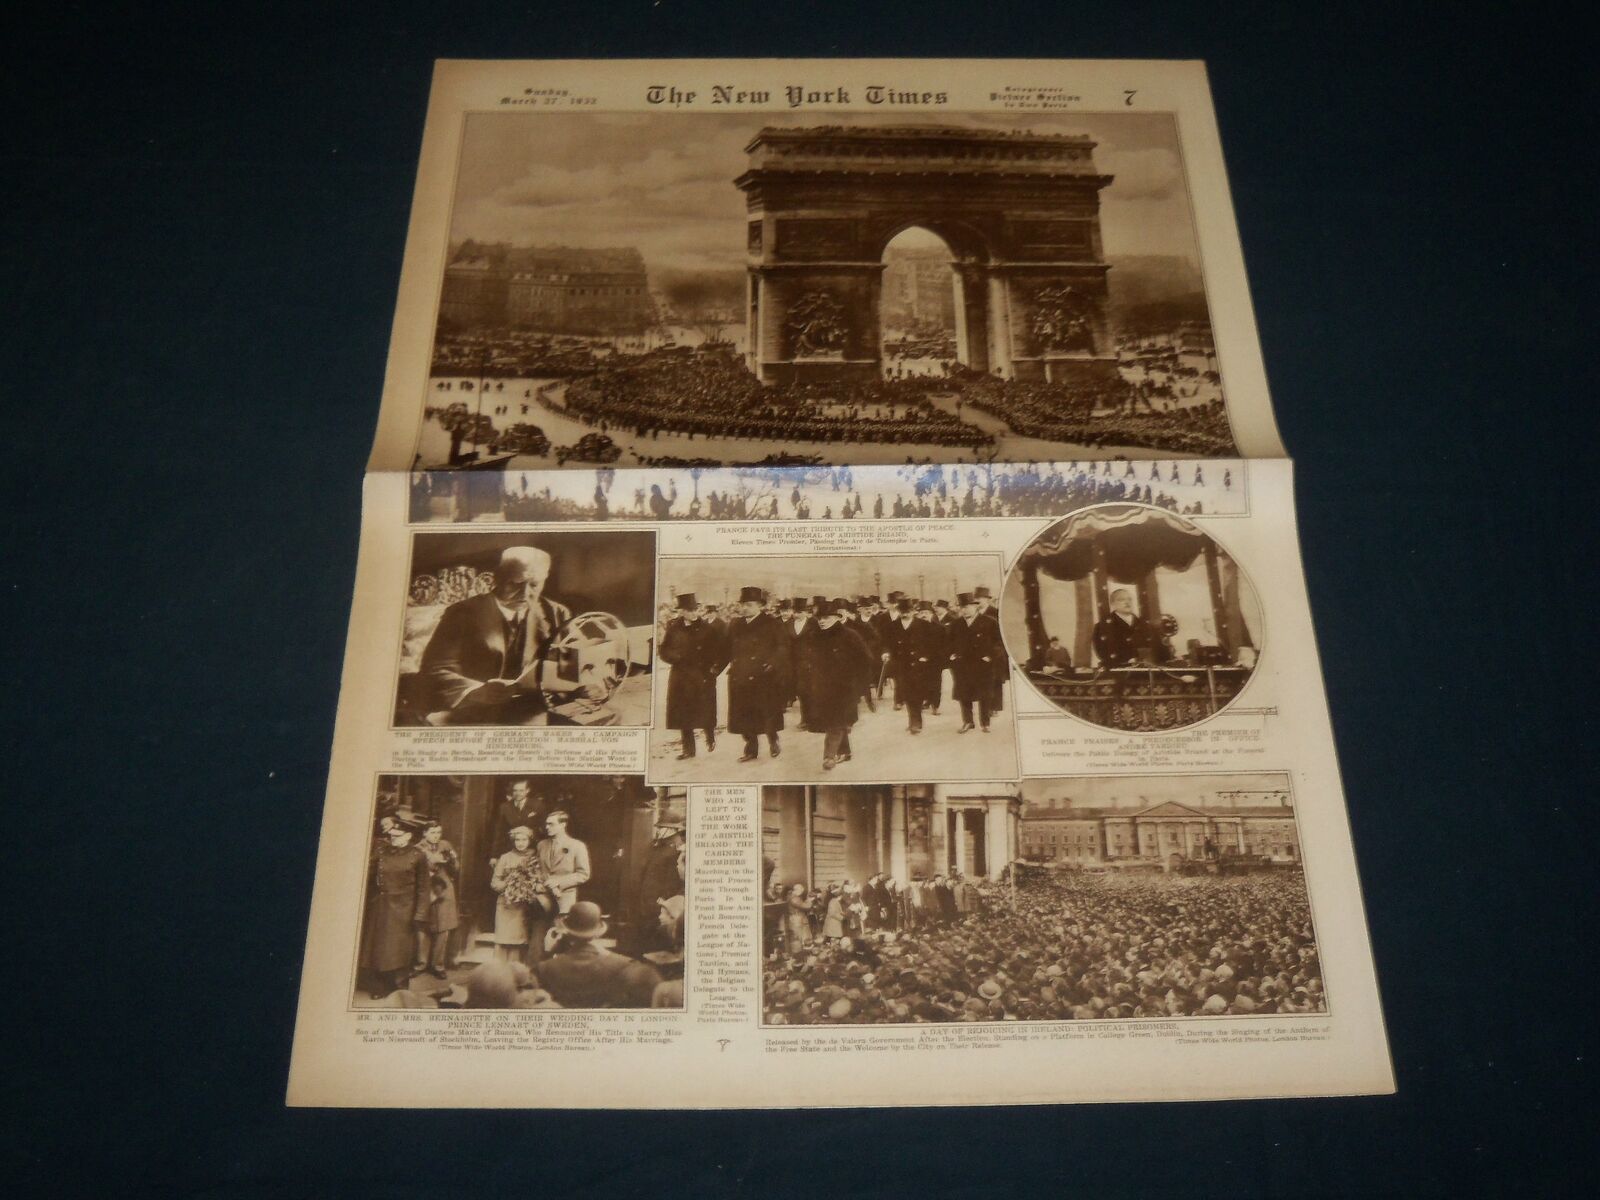 1932 MARCH 27 NEW YORK TIMES ROTO PICTURE SECTION - BRIAND FUNERAL - NT 9384